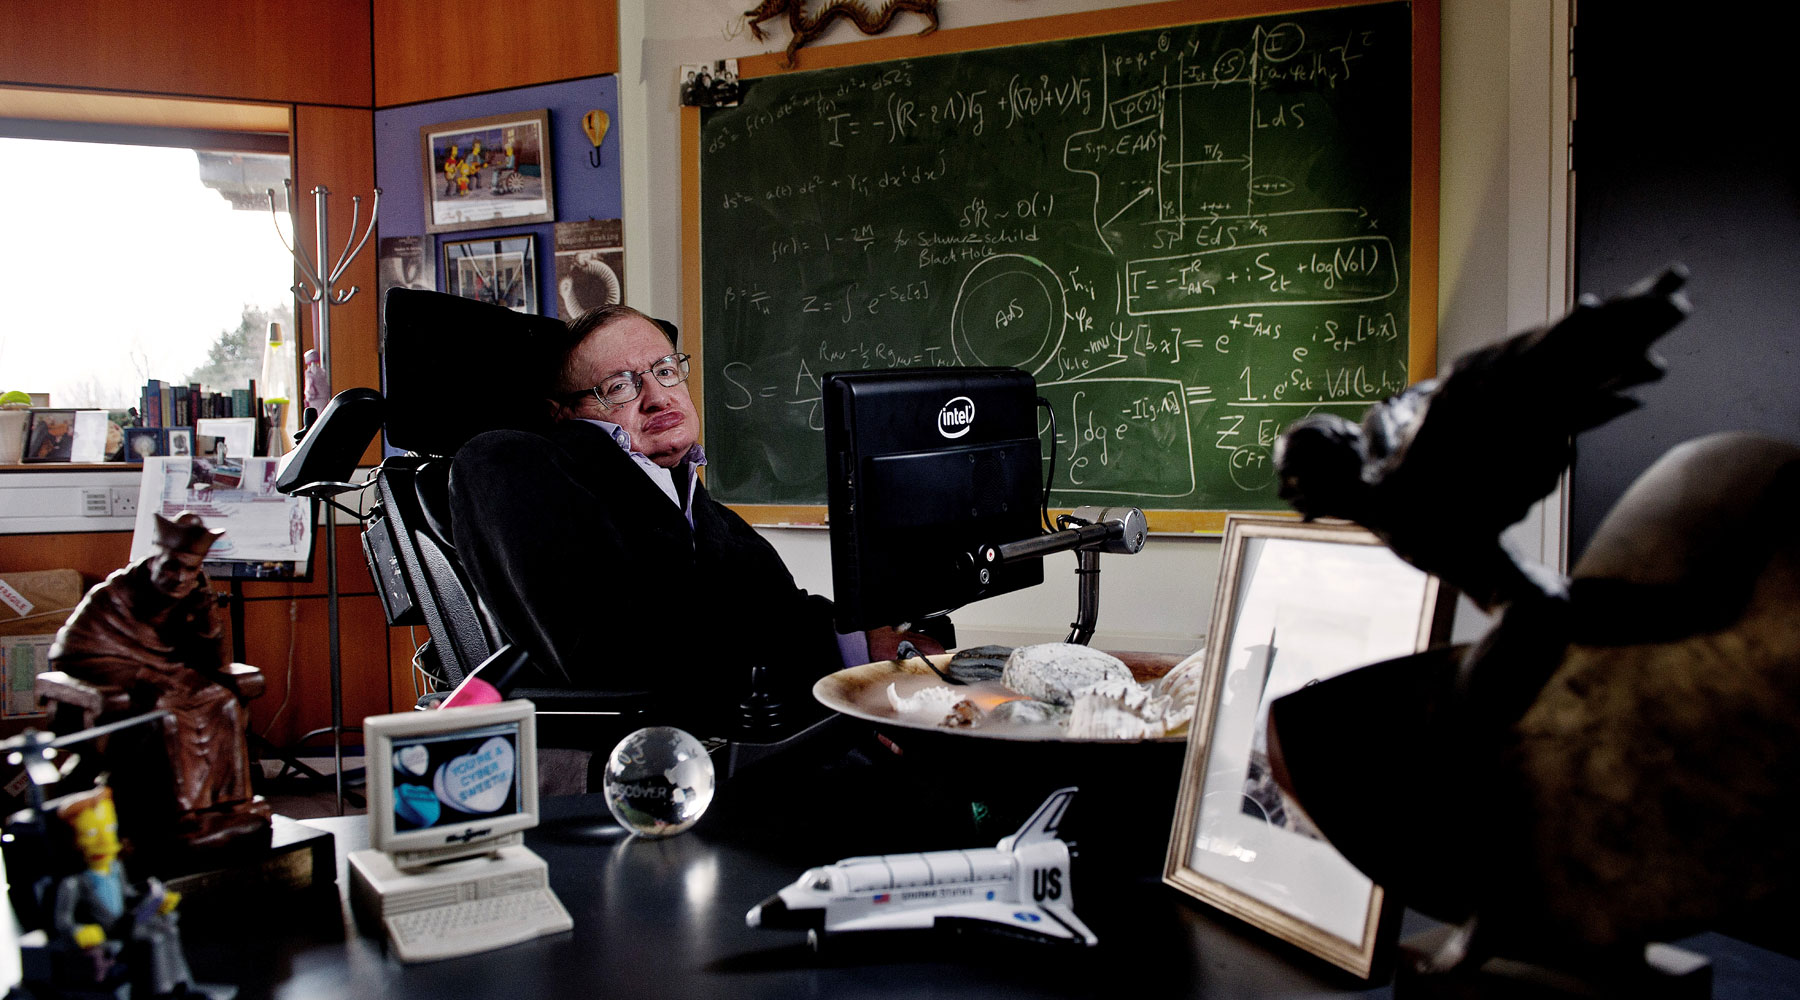 Stephen Hawking's office going on display at the Science Museum